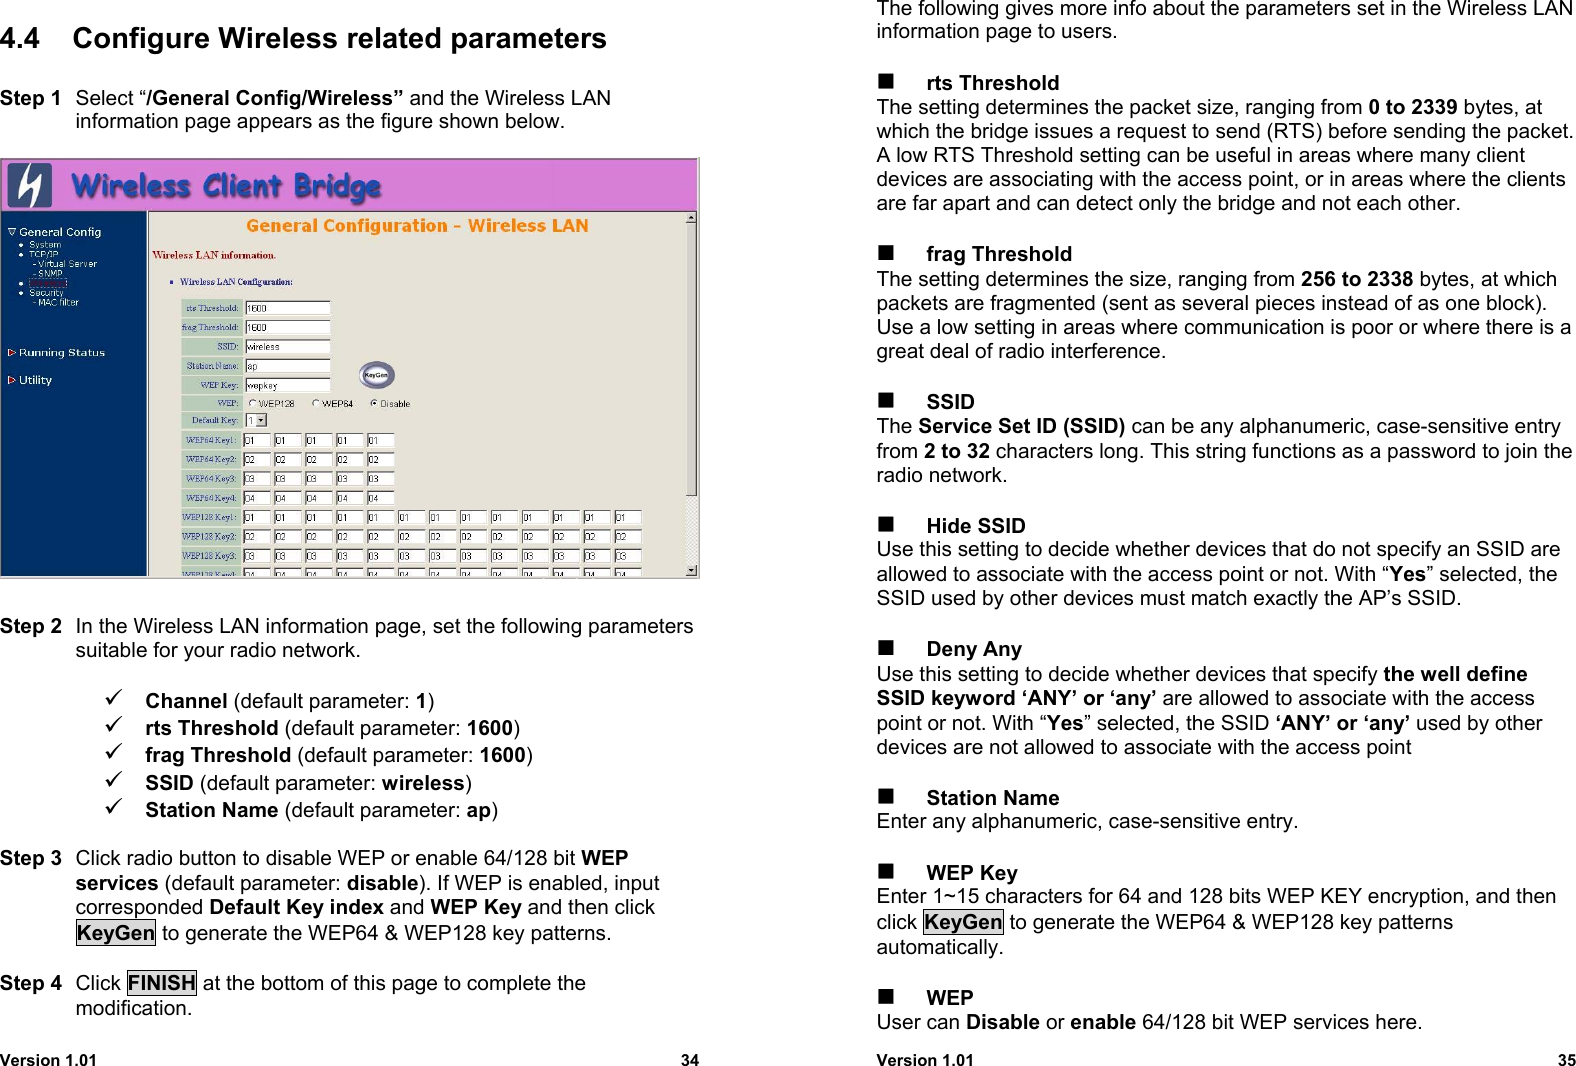 Version 1.01 344.4  Configure Wireless related parametersStep 1 Select “/General Config/Wireless” and the Wireless LANinformation page appears as the figure shown below.Step 2 In the Wireless LAN information page, set the following parameterssuitable for your radio network.9 Channel (default parameter: 1)9 rts Threshold (default parameter: 1600)9 frag Threshold (default parameter: 1600)9 SSID (default parameter: wireless)9 Station Name (default parameter: ap)Step 3 Click radio button to disable WEP or enable 64/128 bit WEPservices (default parameter: disable). If WEP is enabled, inputcorresponded Default Key index and WEP Key and then clickKeyGen to generate the WEP64 &amp; WEP128 key patterns.Step 4 Click FINISH at the bottom of this page to complete themodification.Version 1.01 35The following gives more info about the parameters set in the Wireless LANinformation page to users. rts ThresholdThe setting determines the packet size, ranging from 0 to 2339 bytes, atwhich the bridge issues a request to send (RTS) before sending the packet.A low RTS Threshold setting can be useful in areas where many clientdevices are associating with the access point, or in areas where the clientsare far apart and can detect only the bridge and not each other. frag ThresholdThe setting determines the size, ranging from 256 to 2338 bytes, at whichpackets are fragmented (sent as several pieces instead of as one block).Use a low setting in areas where communication is poor or where there is agreat deal of radio interference. SSIDThe Service Set ID (SSID) can be any alphanumeric, case-sensitive entryfrom 2 to 32 characters long. This string functions as a password to join theradio network. Hide SSIDUse this setting to decide whether devices that do not specify an SSID areallowed to associate with the access point or not. With “Yes” selected, theSSID used by other devices must match exactly the AP’s SSID. Deny AnyUse this setting to decide whether devices that specify the well defineSSID keyword ‘ANY’ or ‘any’ are allowed to associate with the accesspoint or not. With “Yes” selected, the SSID ‘ANY’ or ‘any’ used by otherdevices are not allowed to associate with the access point Station NameEnter any alphanumeric, case-sensitive entry. WEP KeyEnter 1~15 characters for 64 and 128 bits WEP KEY encryption, and thenclick KeyGen to generate the WEP64 &amp; WEP128 key patternsautomatically. WEPUser can Disable or enable 64/128 bit WEP services here.